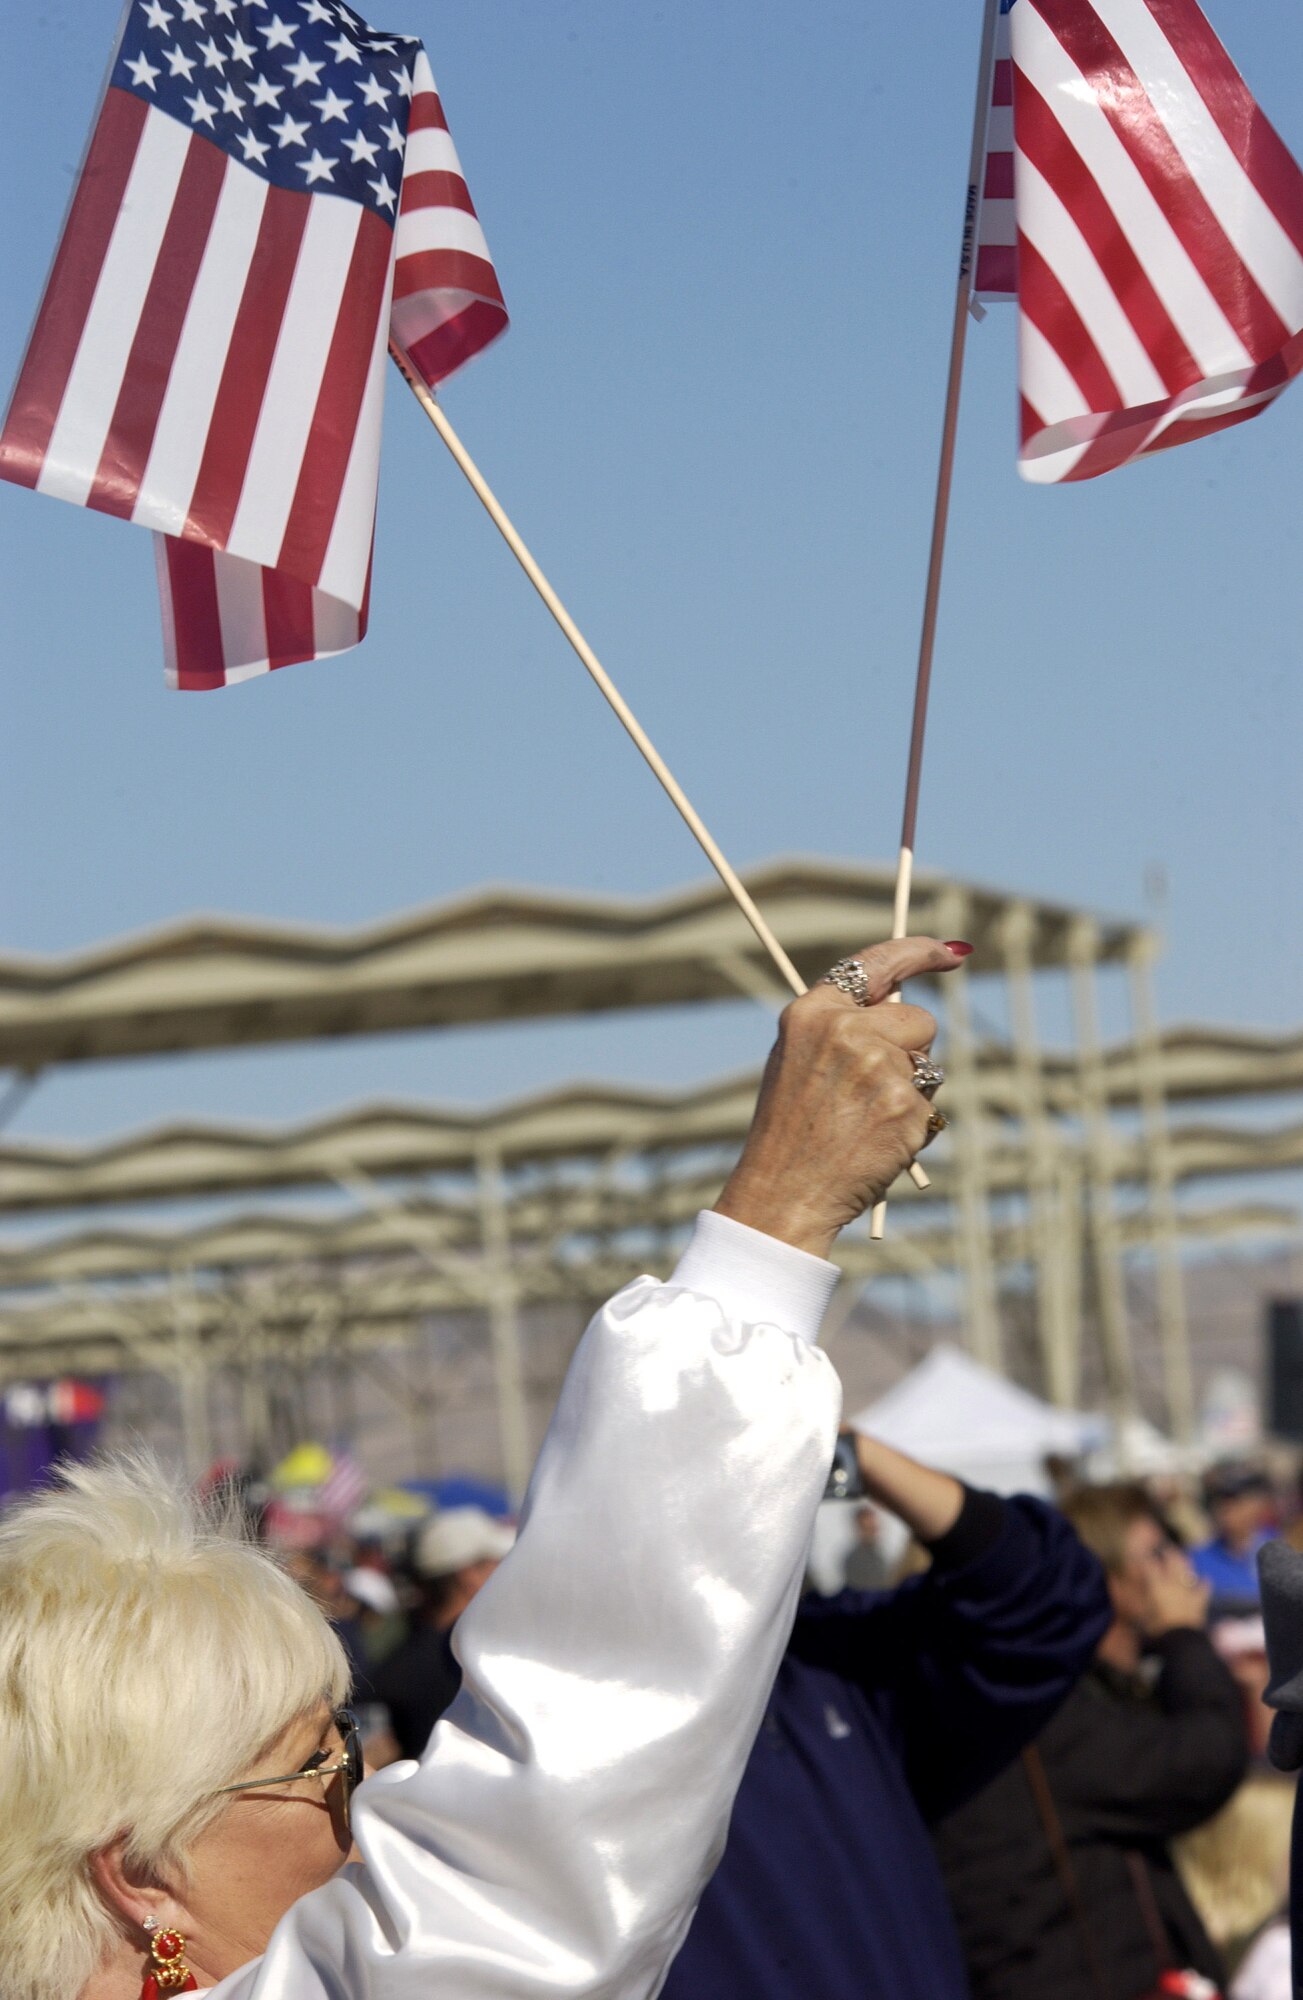 An air show spectator waves her flags during Aviation Nation 2006 Nov. 12 at Nellis Air Force Base, Nev. The show was held Nov. 11 and 12. (U.S. Air Force photo/Master Sgt. Kevin J. Gruenwald)
